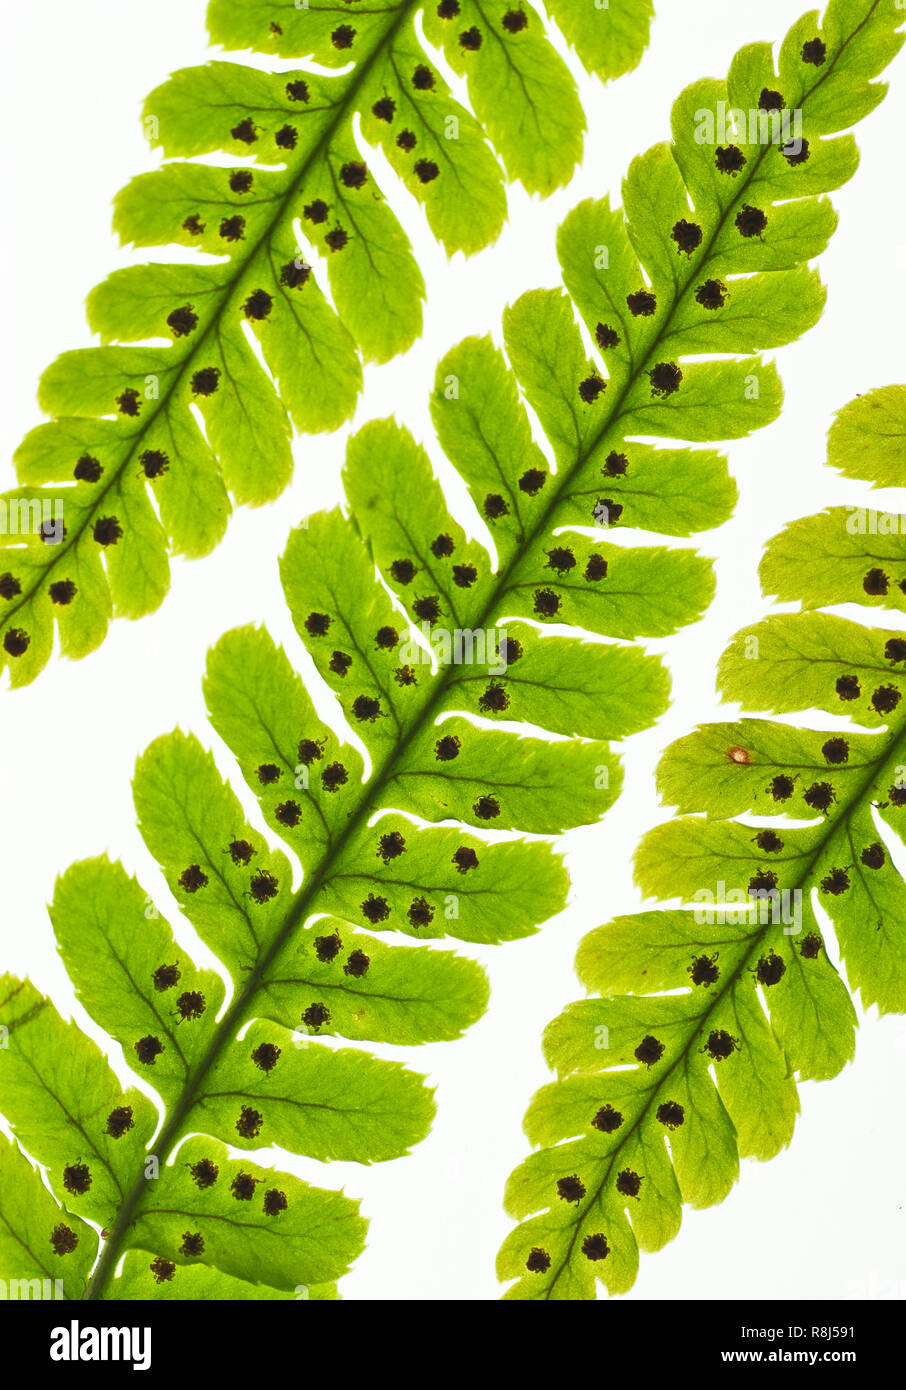 Sori-bearing fronds of autumn fern (Dryopteris erythrosora). The sori (sources) produce spores that are disseminated by wind and rain. Stock Photo